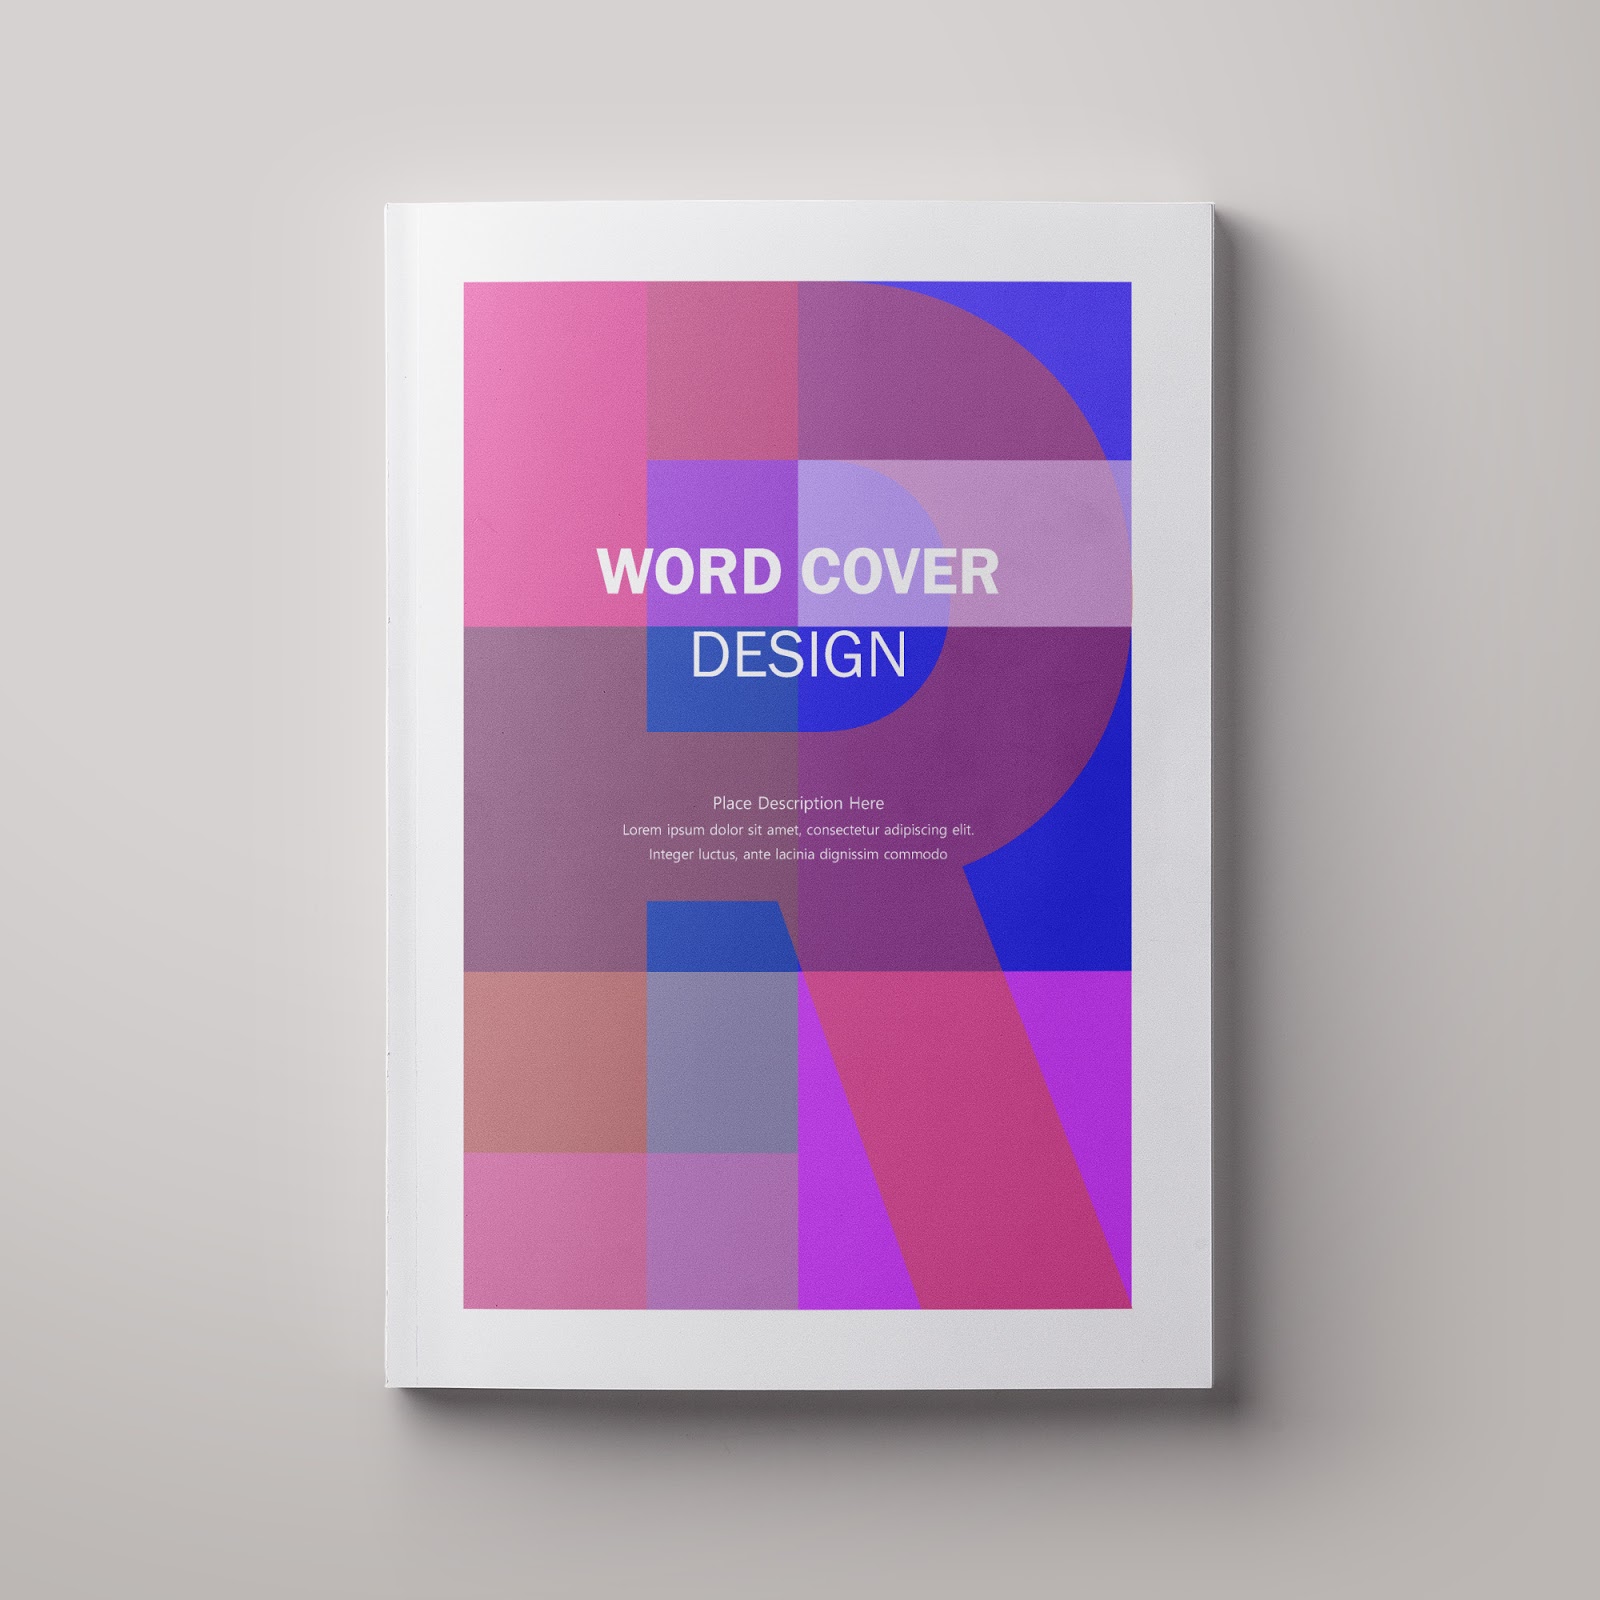 Microsoft Word Cover Templates | 98 Free Download - Word Free